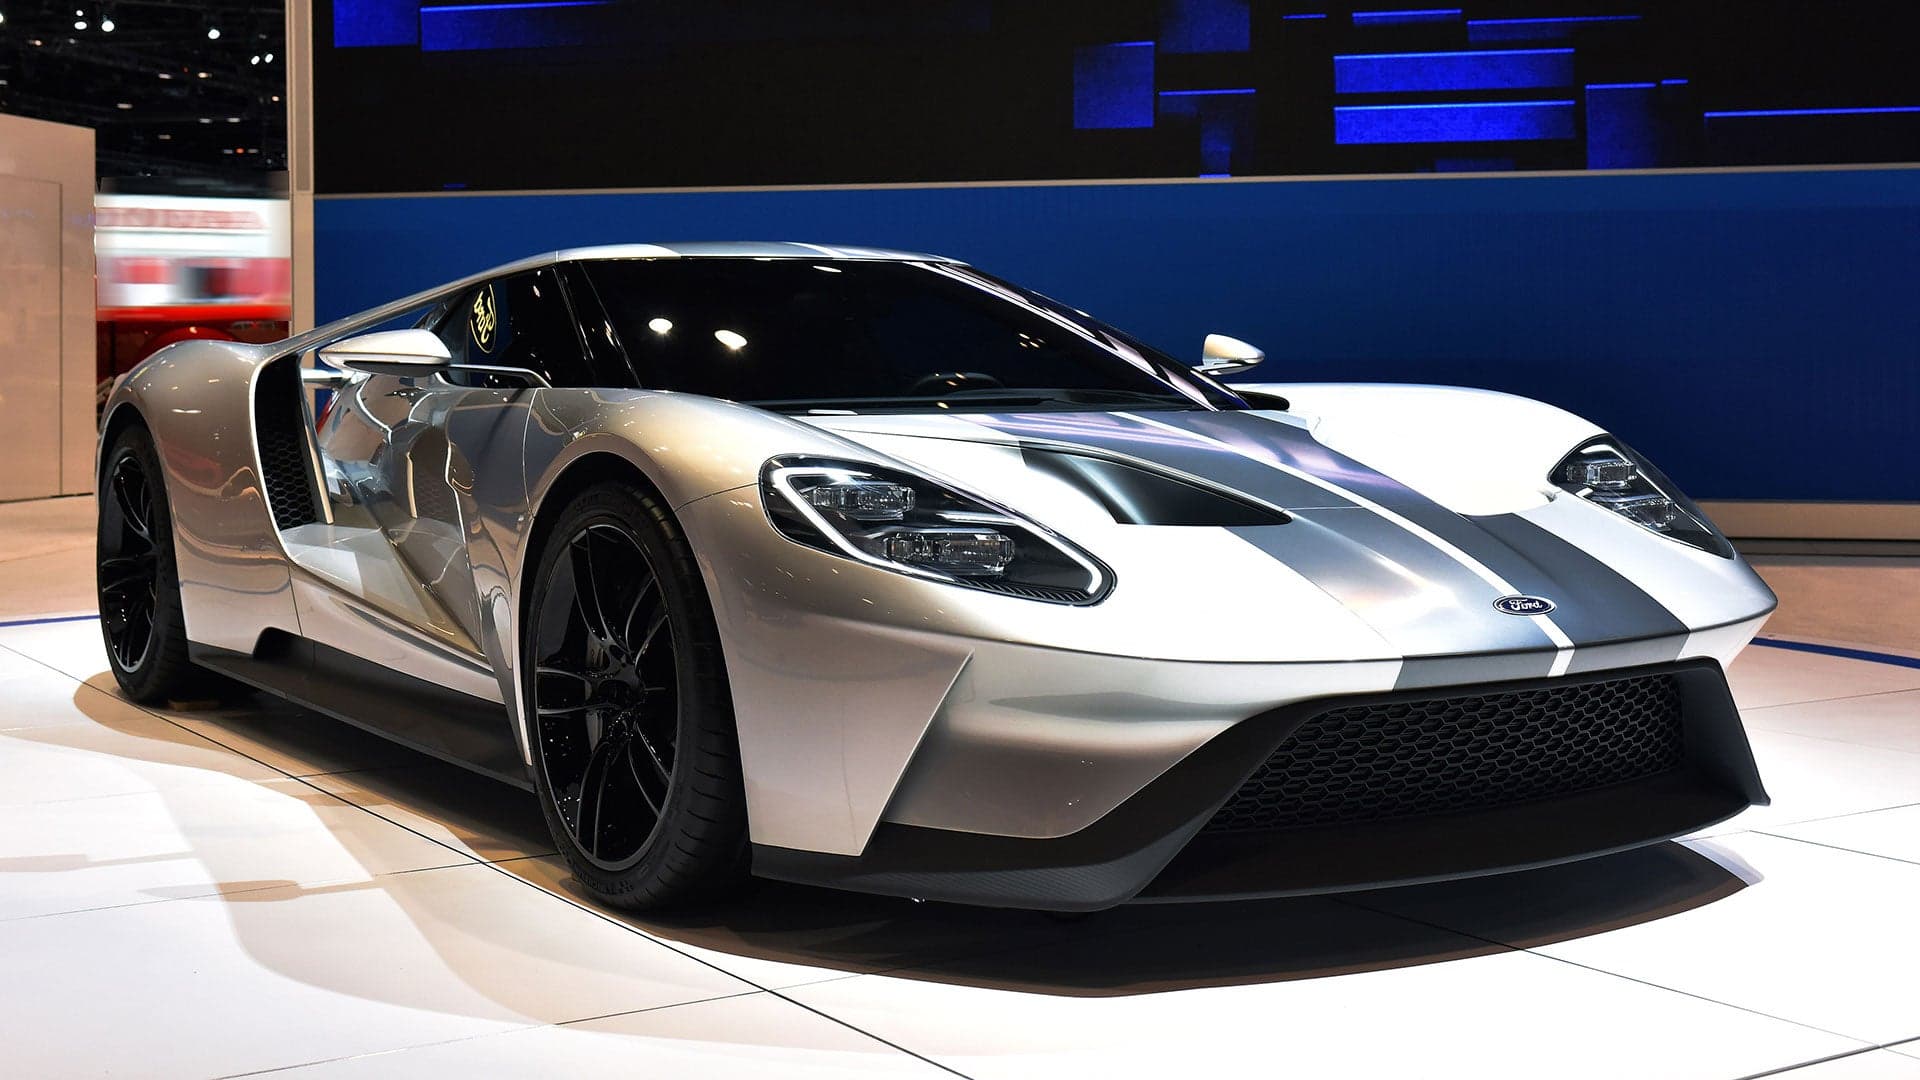 You’ll Need to “Qualify” to Buy a New Ford GT